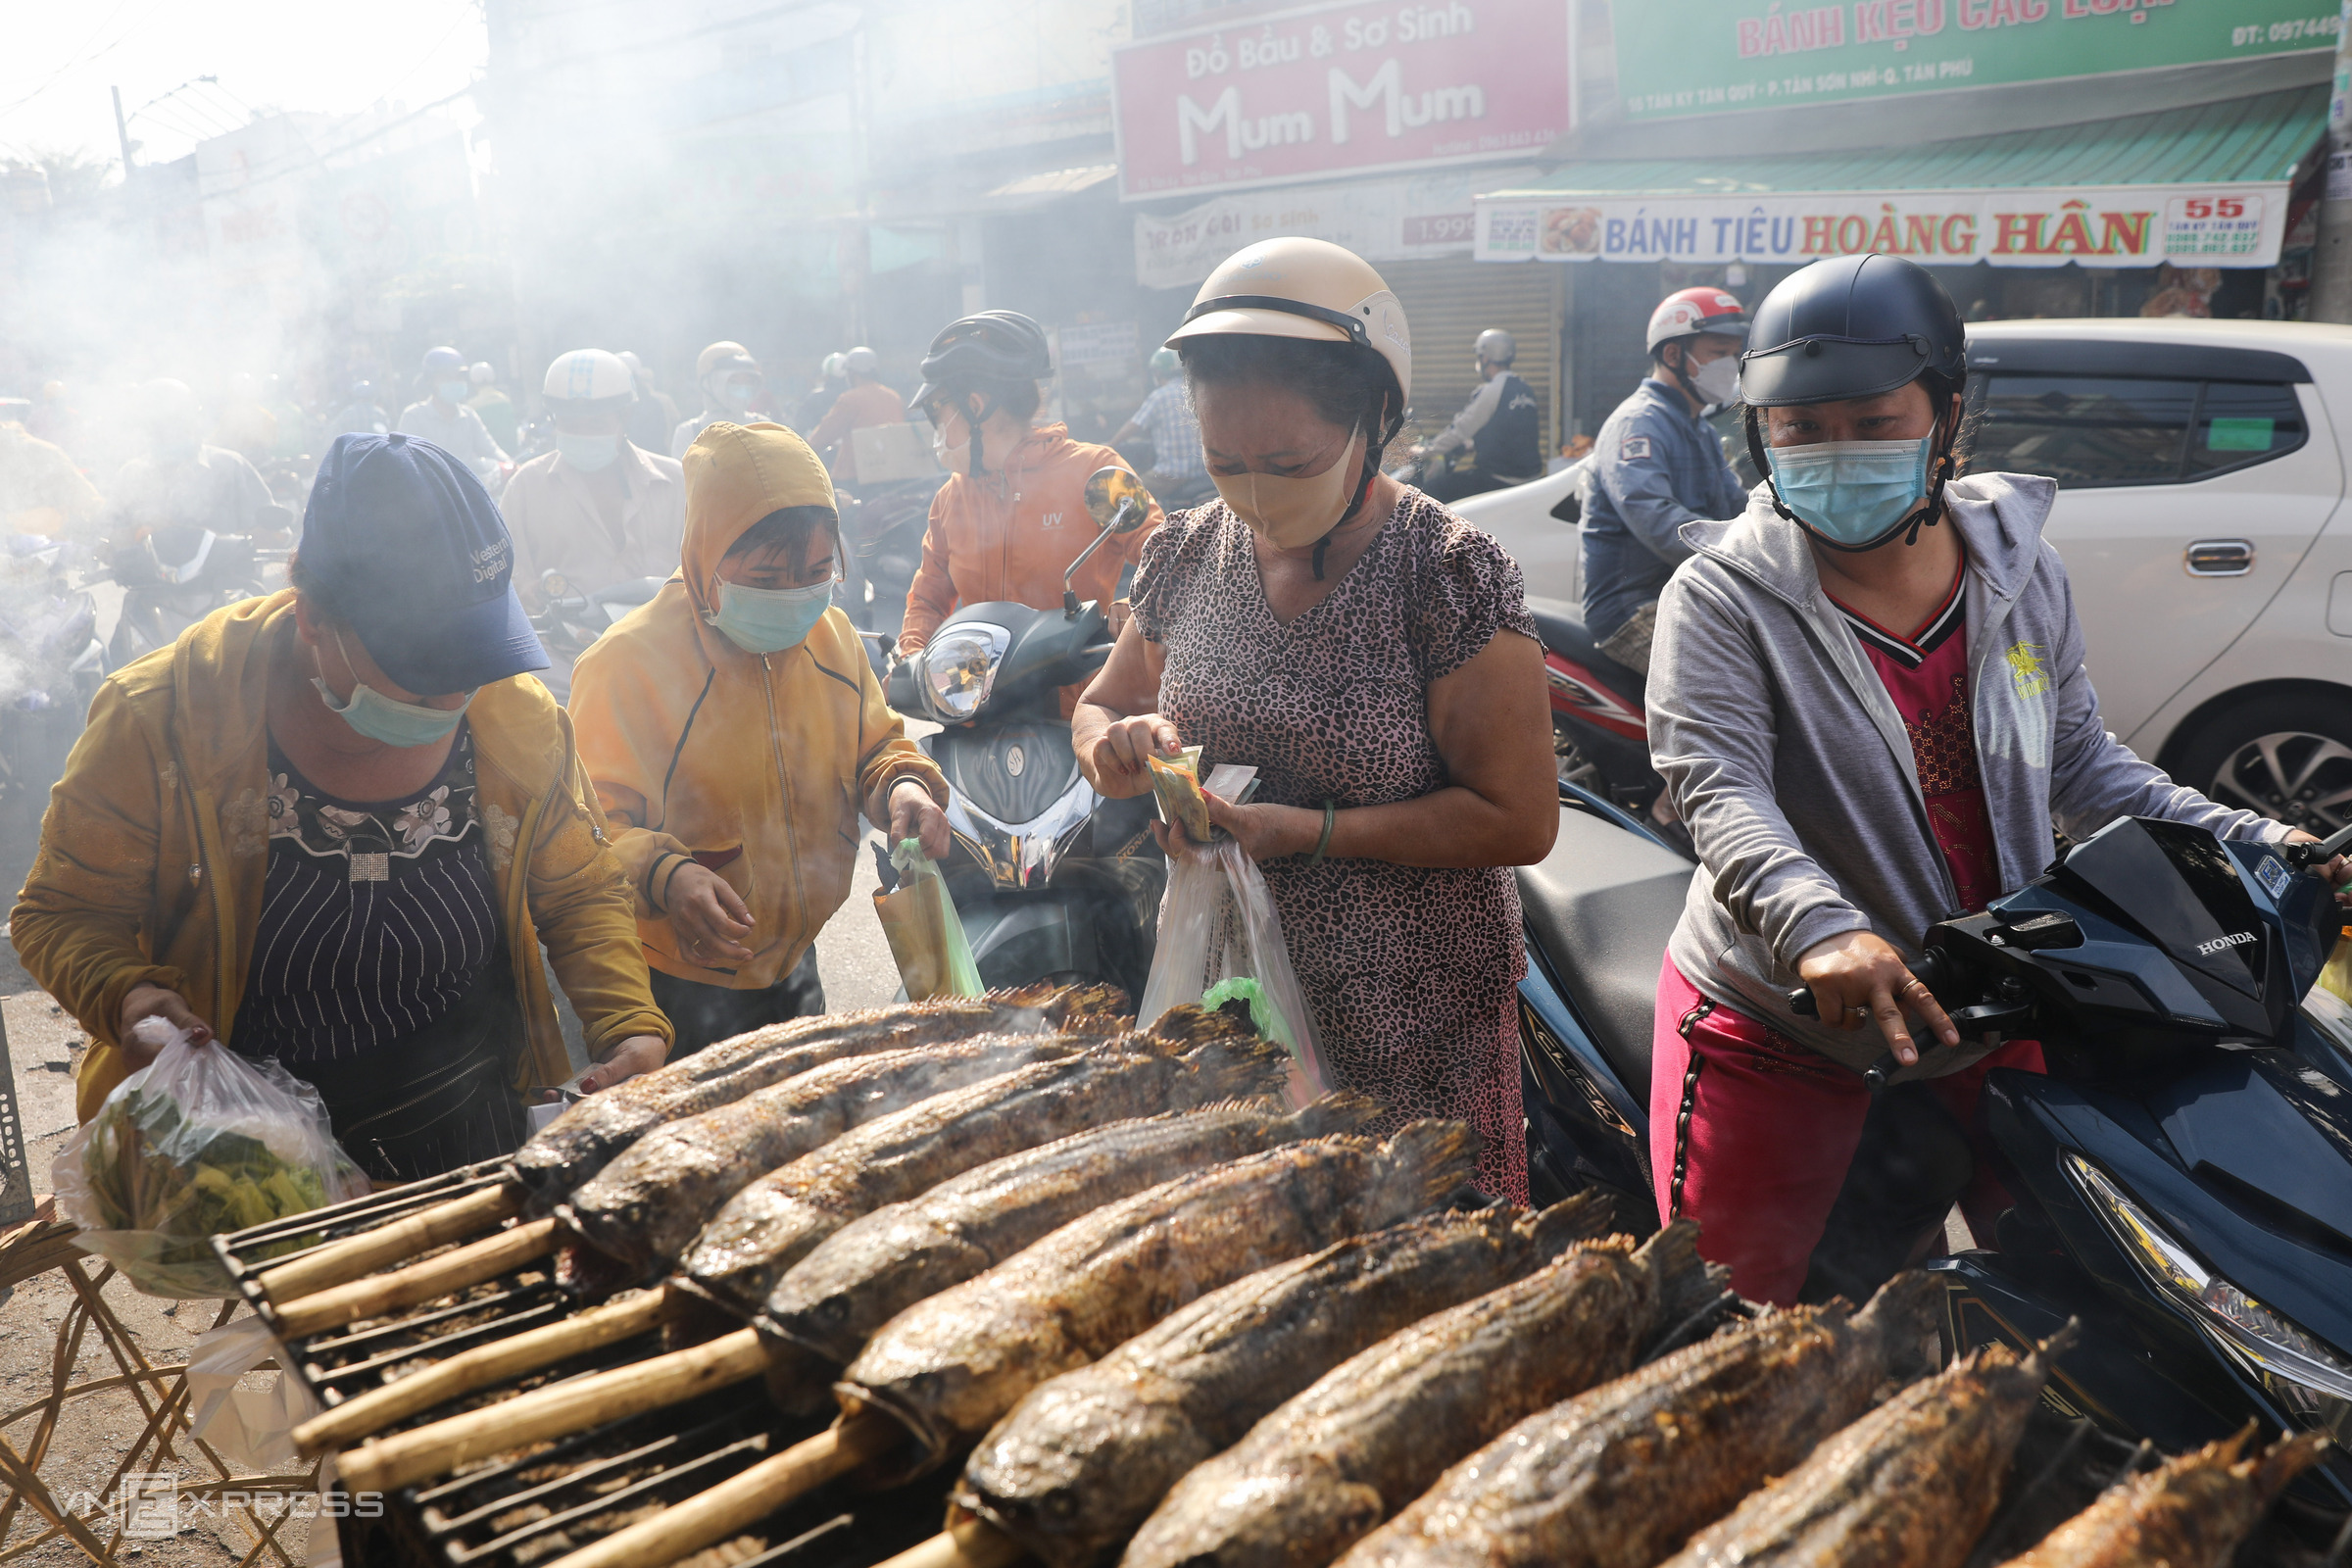 Smoke fills a corner of the street, which was packed with customers since Thursday morning.Depending ont the size, the price for each grilled snakehead fish ranges between VND170,000-200,000 ($7.49-8.81). This price, according to many stalls, increased slightly over the previous year.